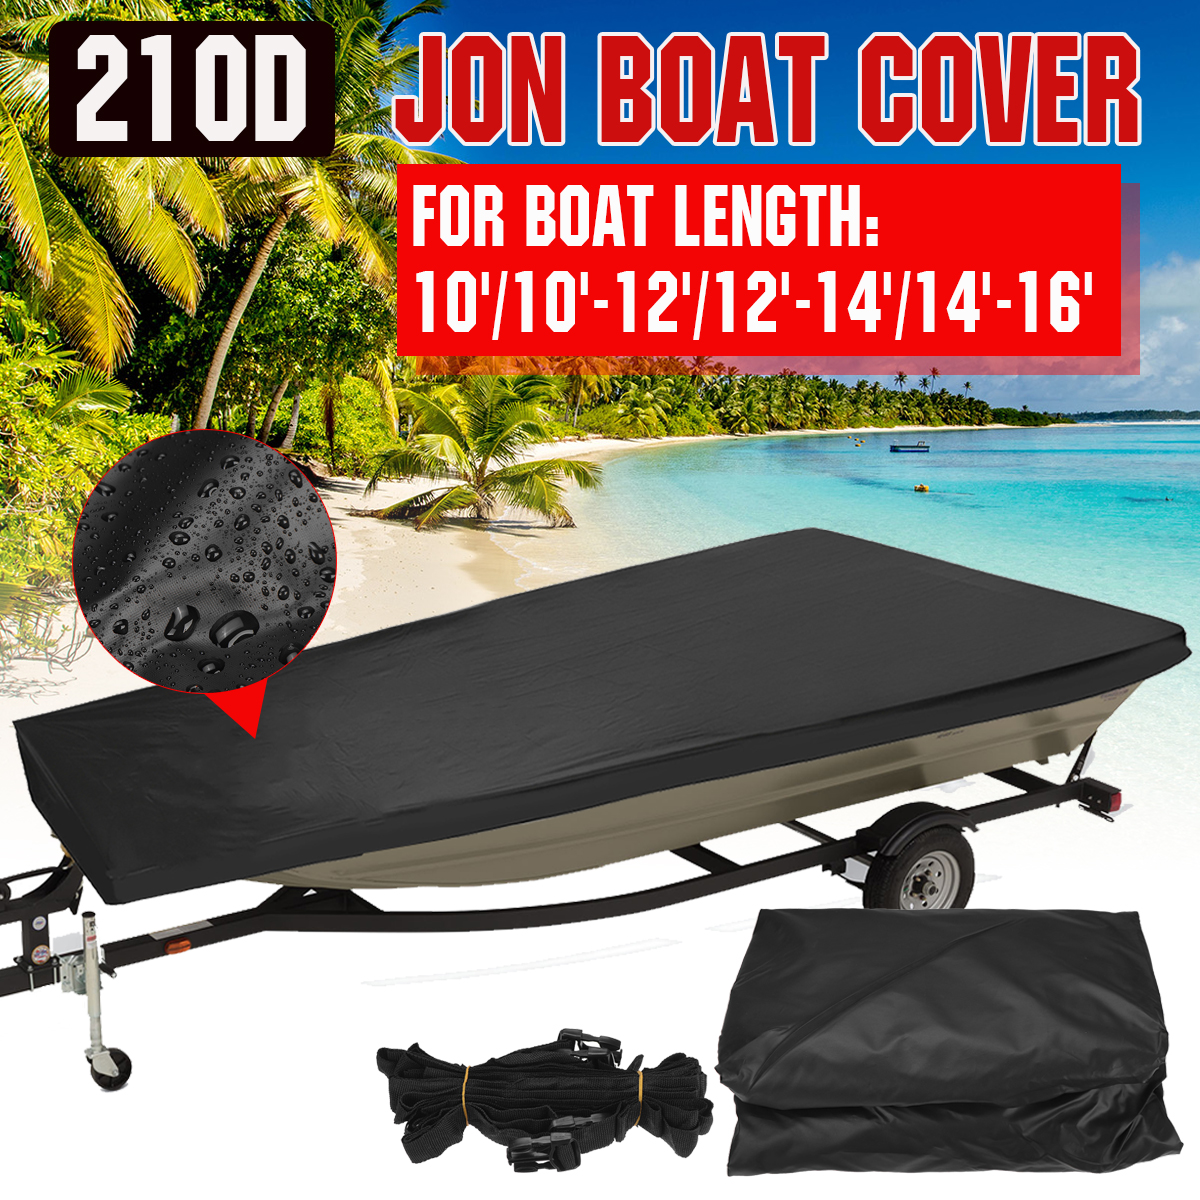 Boat Covers 10ft / 1012ft /1214ft / 1416ft Jon Boat Cover 210D Waterproof Sun Protection B